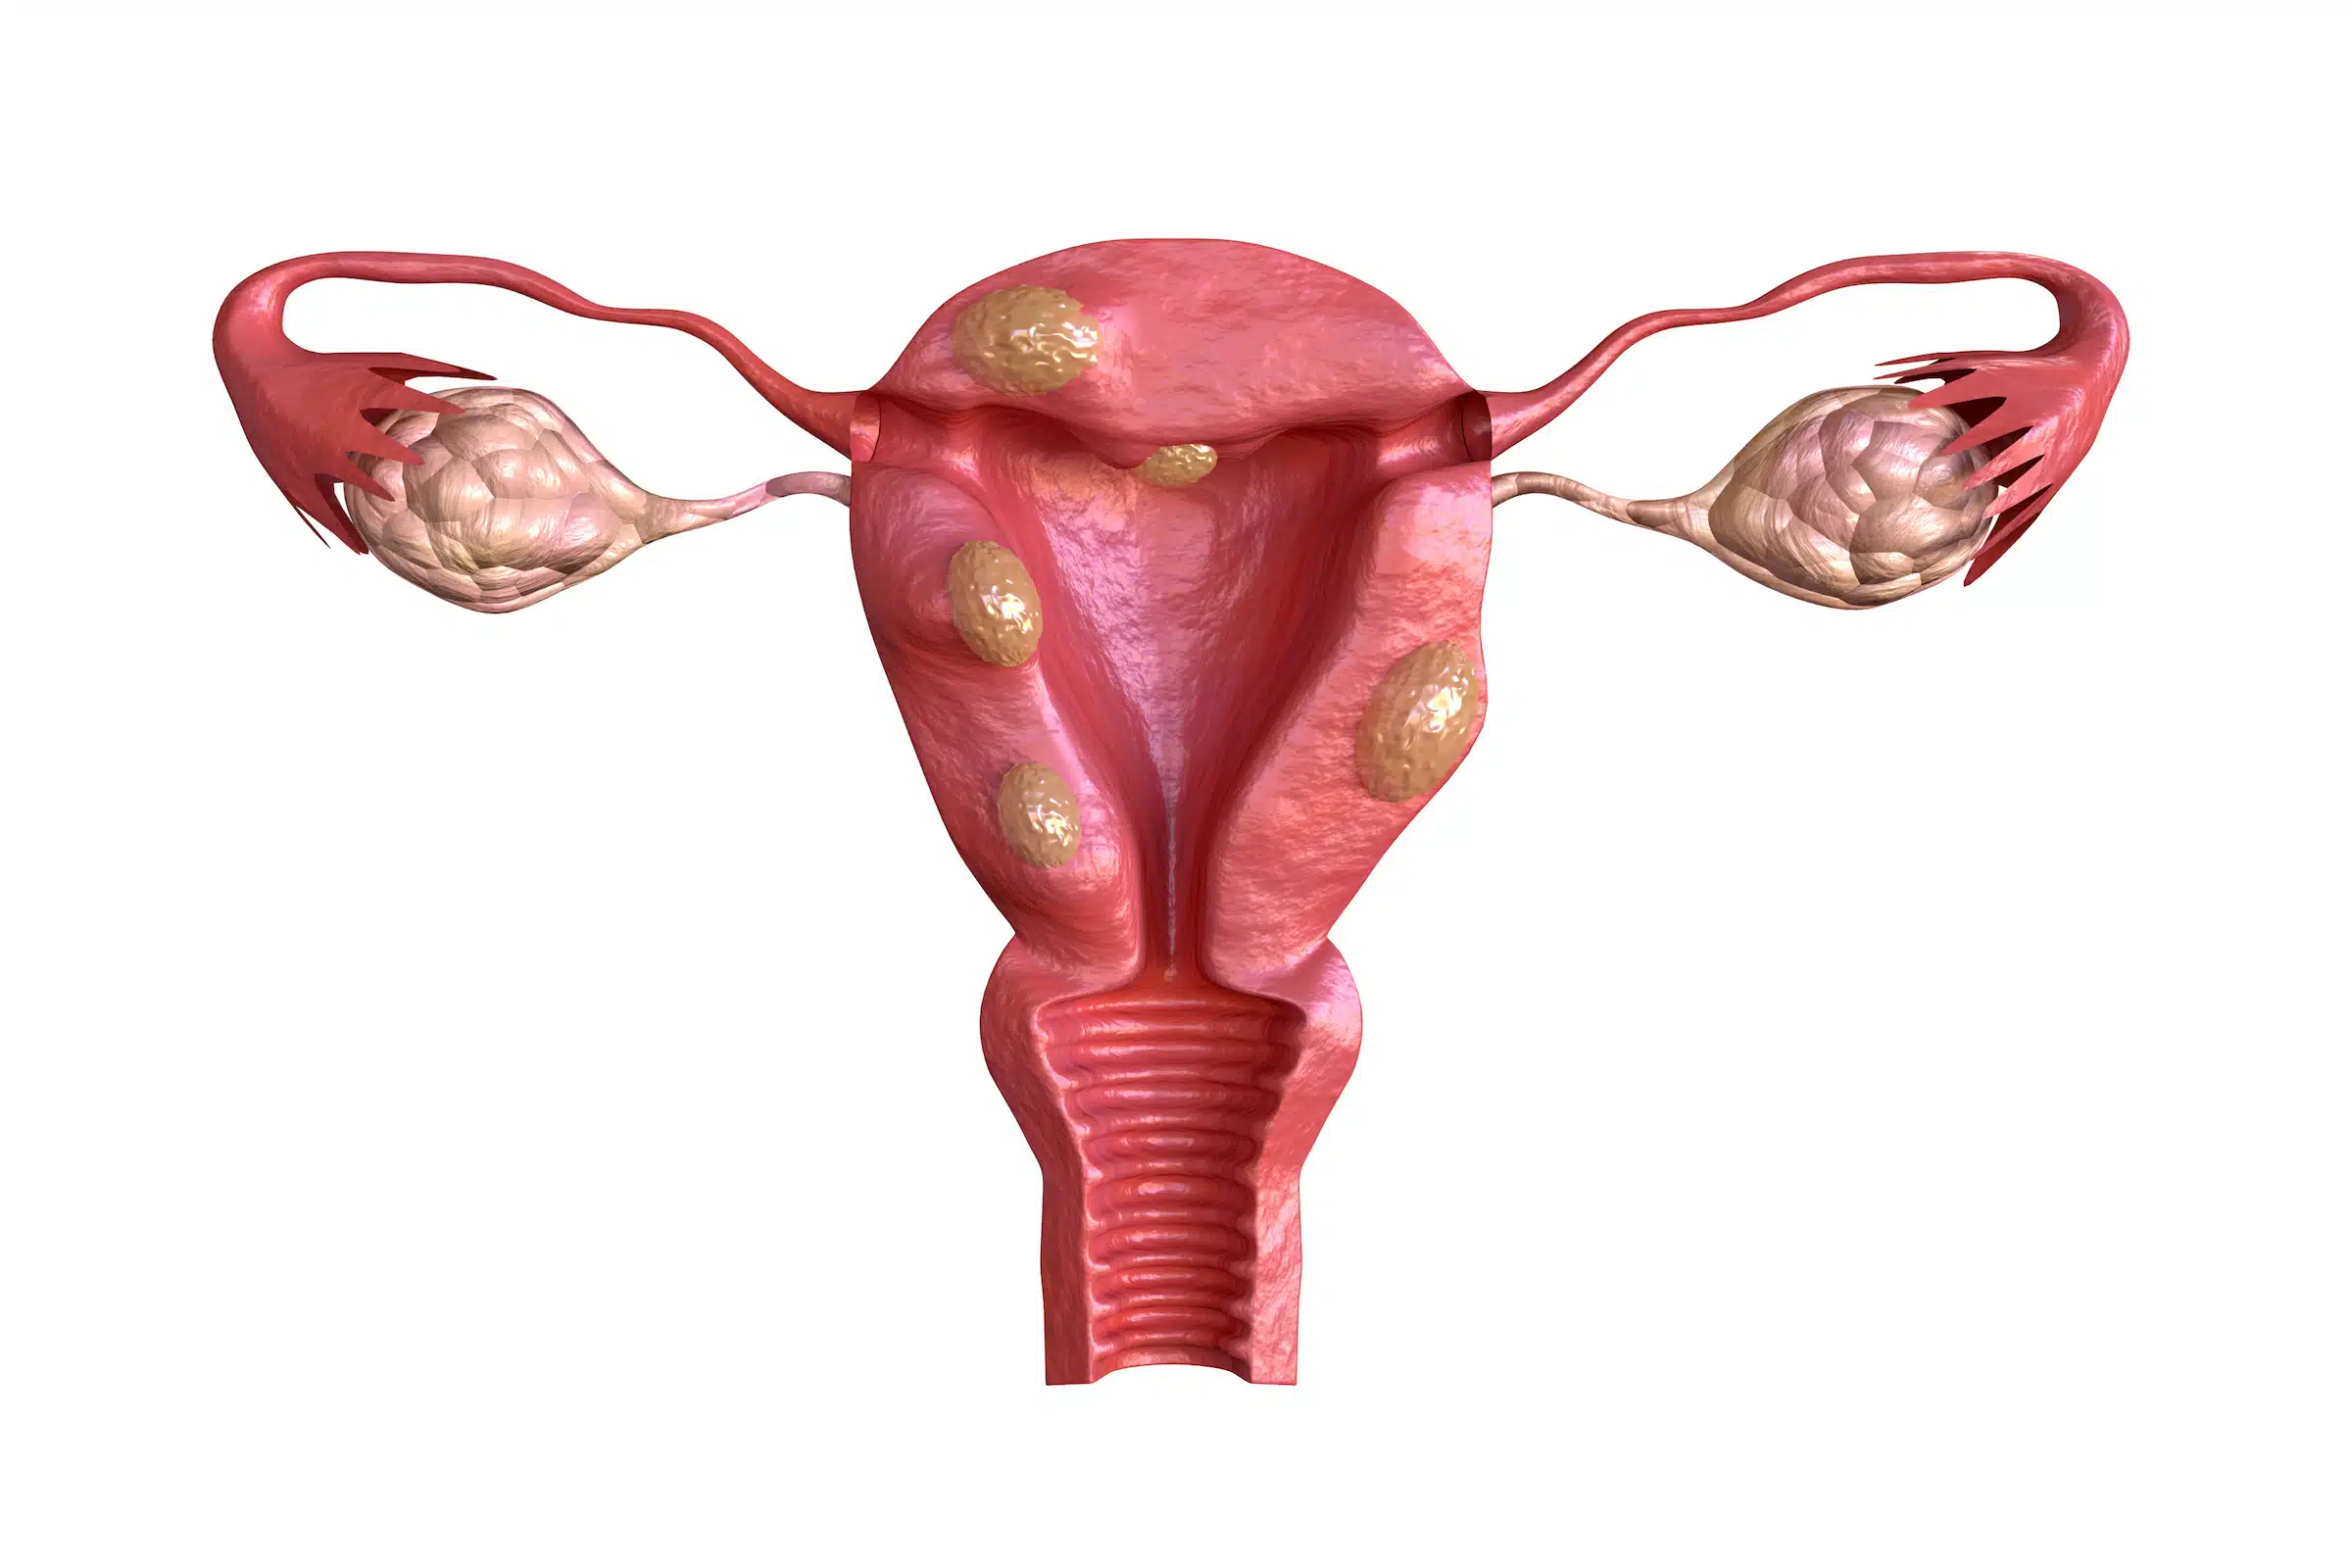 Dispelling Myths About Fibroids